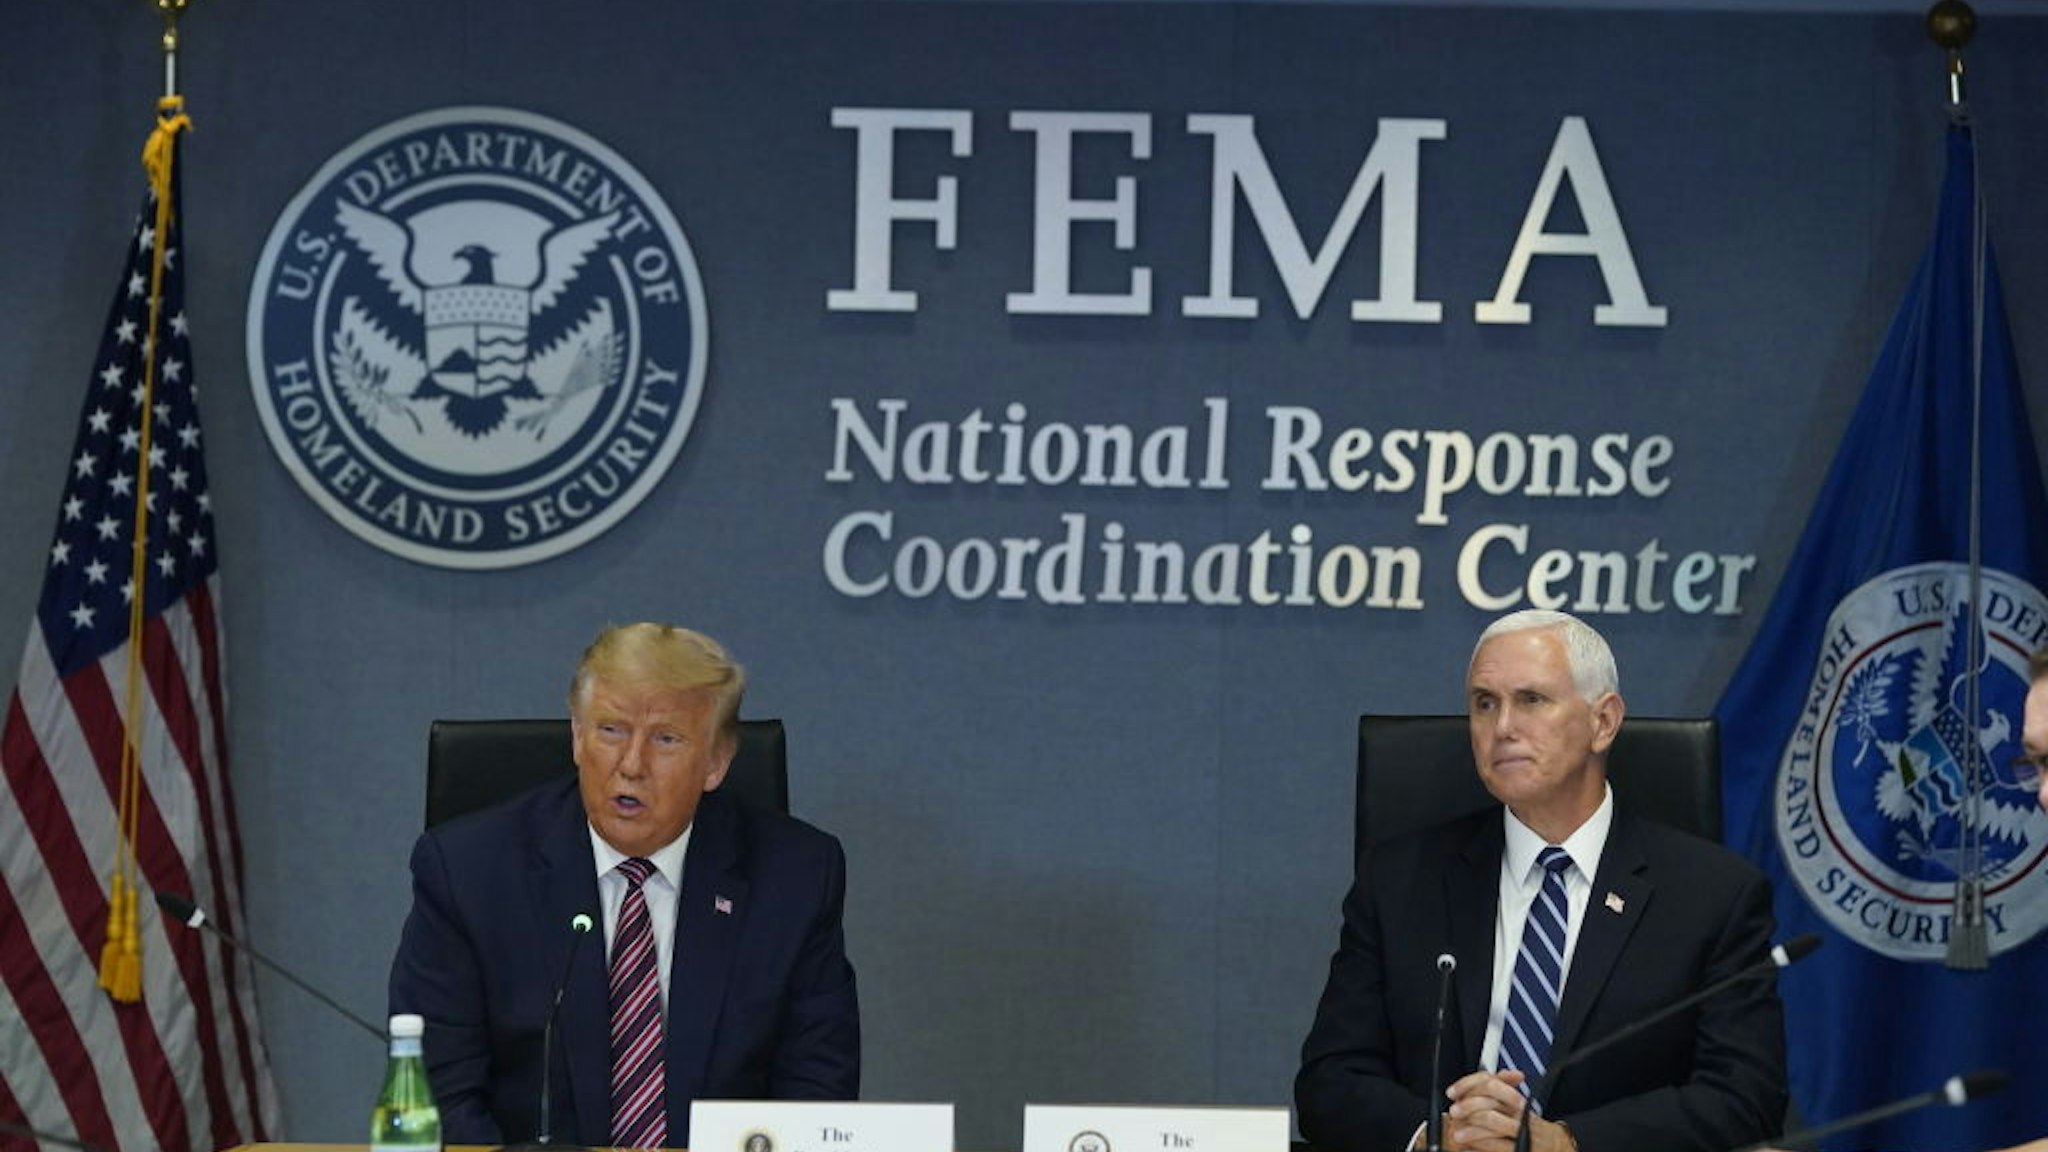 U.S. President Donald Trump speaks while Vice President Mike Pence, right, listens during a meeting at the Federal Emergency Management Agency (FEMA) headquarters in Washington, D.C., U.S., on Thursday, Aug. 27, 2020. Donald Trump visited FEMA to monitor Tropical Storm Laura's assault on the Gulf Coast -- hours before hes set to accept the GOP nomination for president.